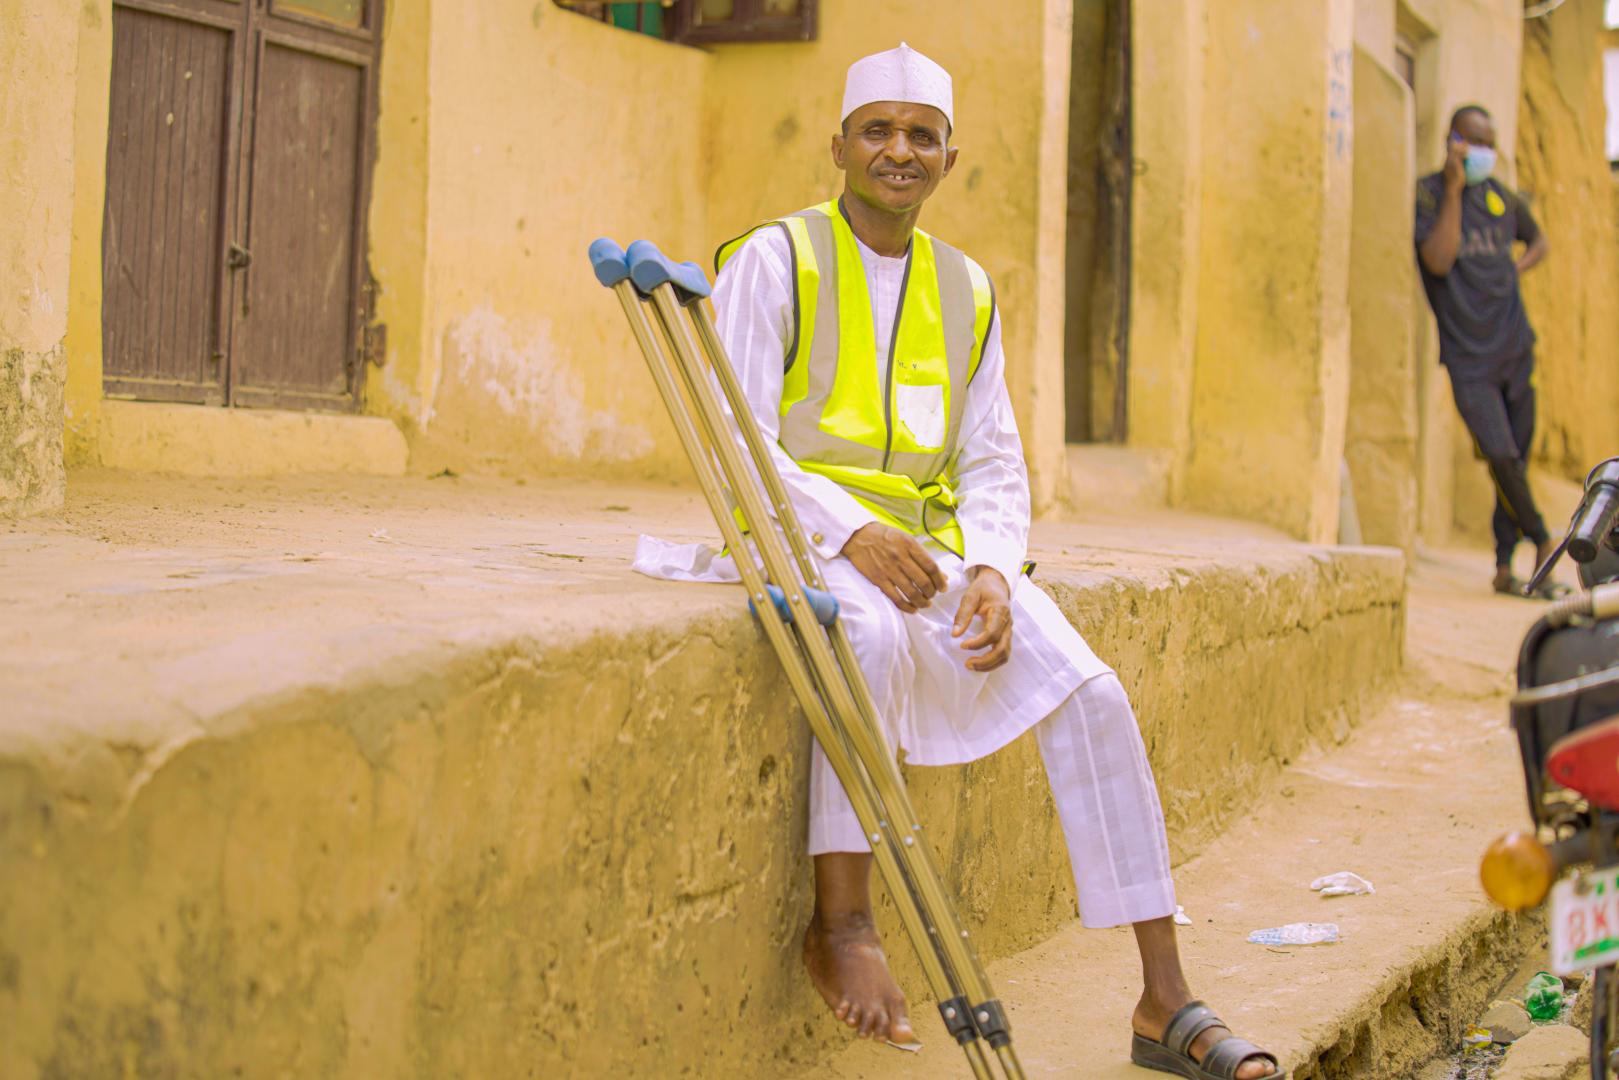 A polio survivor, Ibrahim Mohammed in the field mobilizing support for polio vaccination